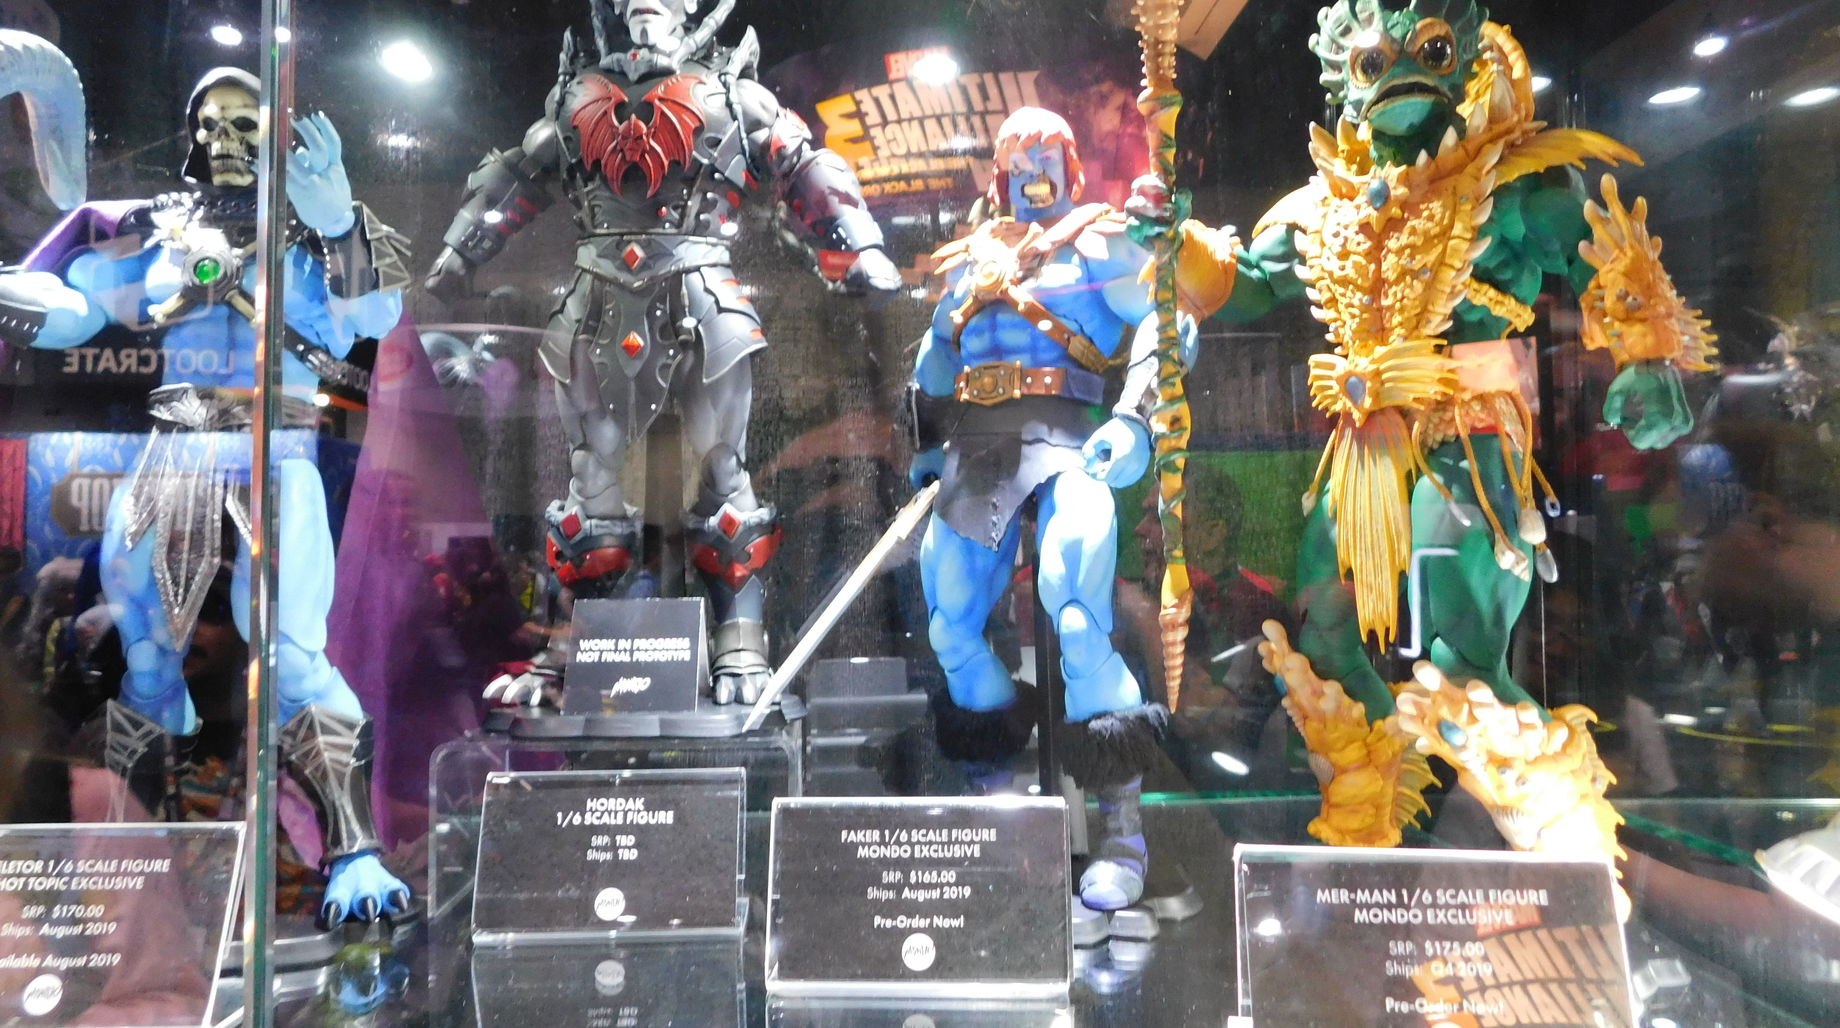 SDCC 2019 Brand Activations